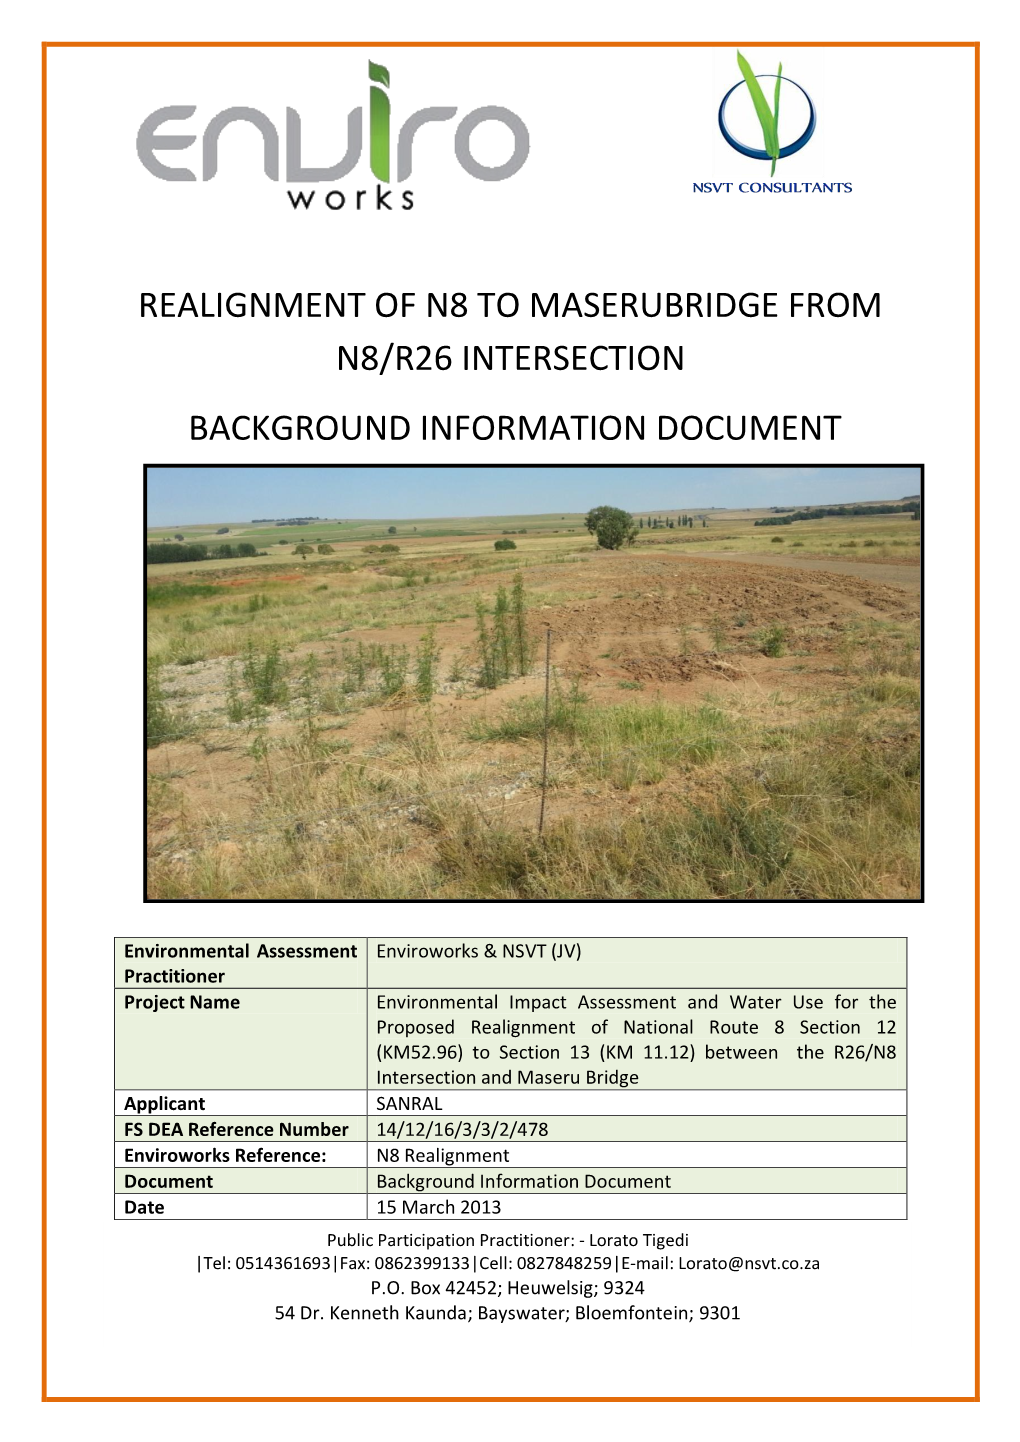 Realignment of N8 to Maserubridge from N8/R26 Intersection Background Information Document